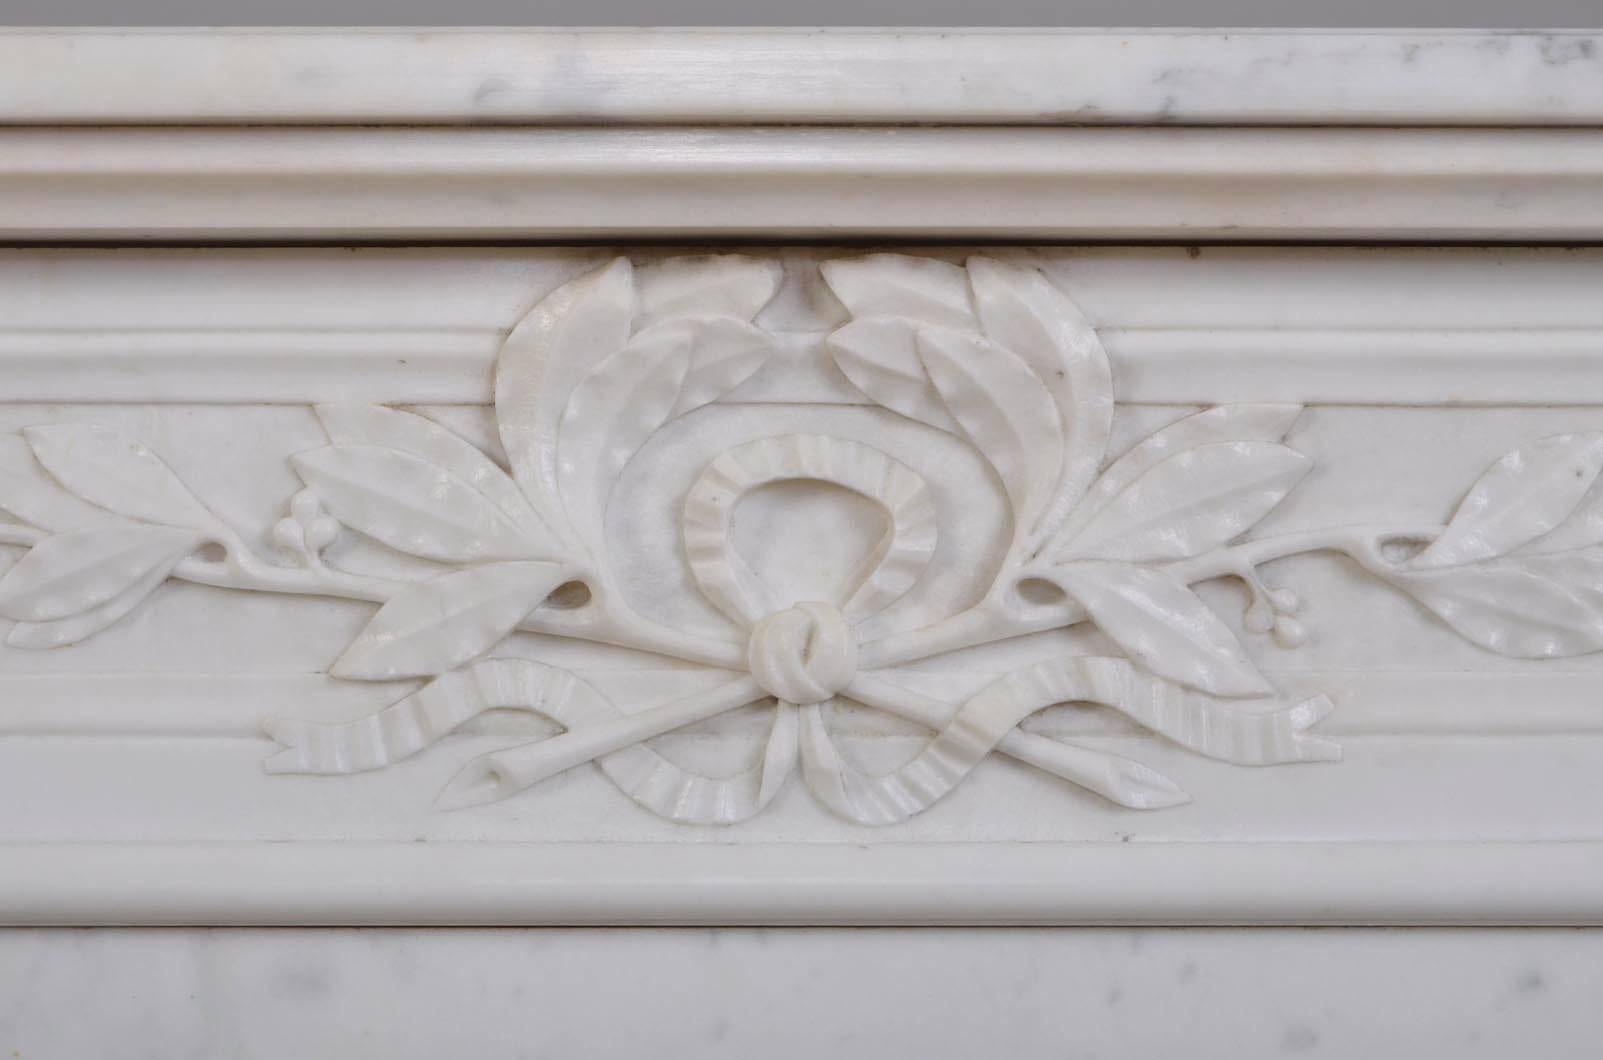 This antique Louis XVI style fireplace was made out of Carrara marble during the 19th century. The frieze is carved with intertwined laurel branches.
The fireplace is sold with a modern insert.